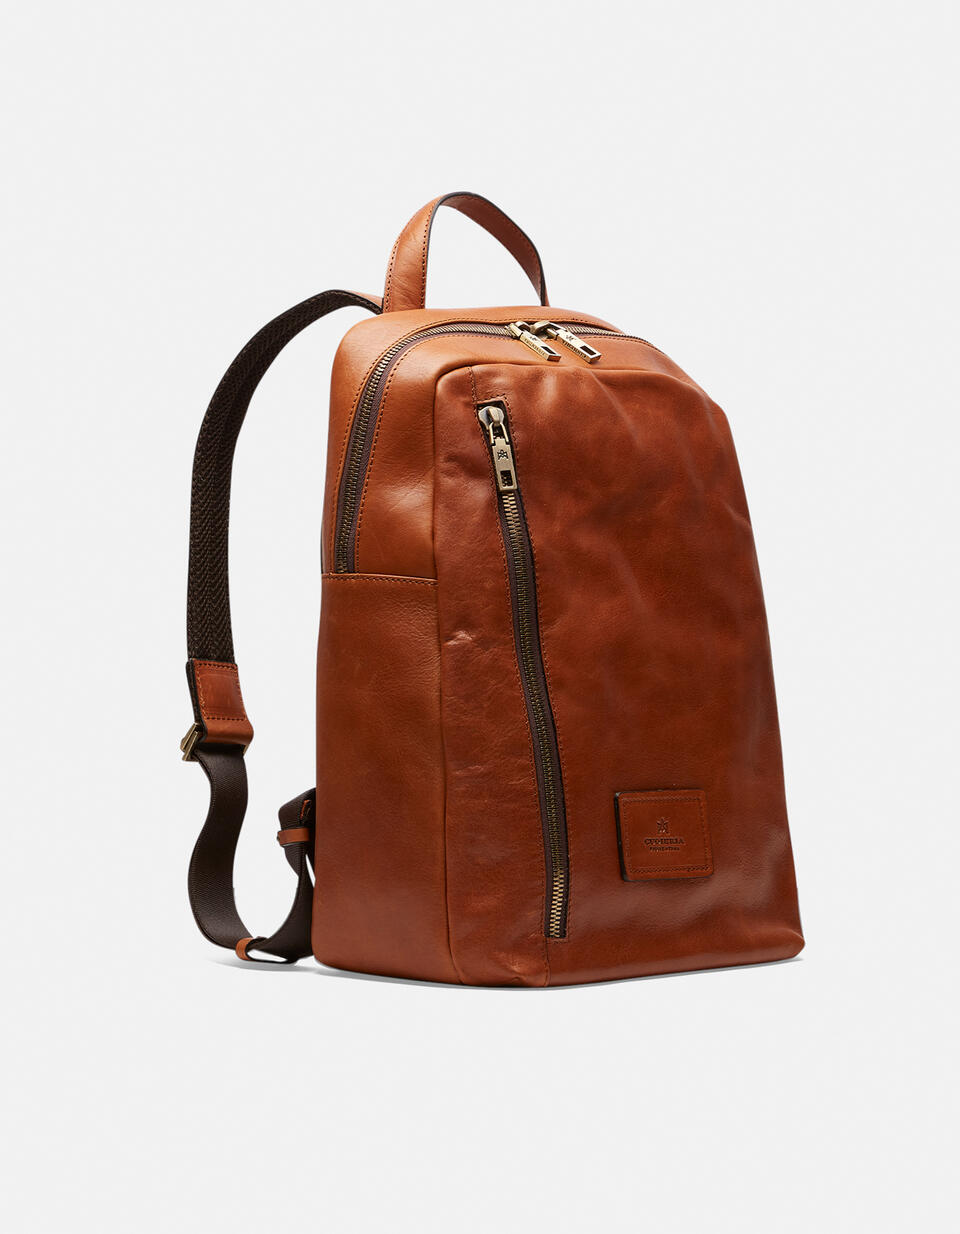 Backpack NATURALE  - Backpacks & Toiletry Bag - Travel Bags - Cuoieria Fiorentina